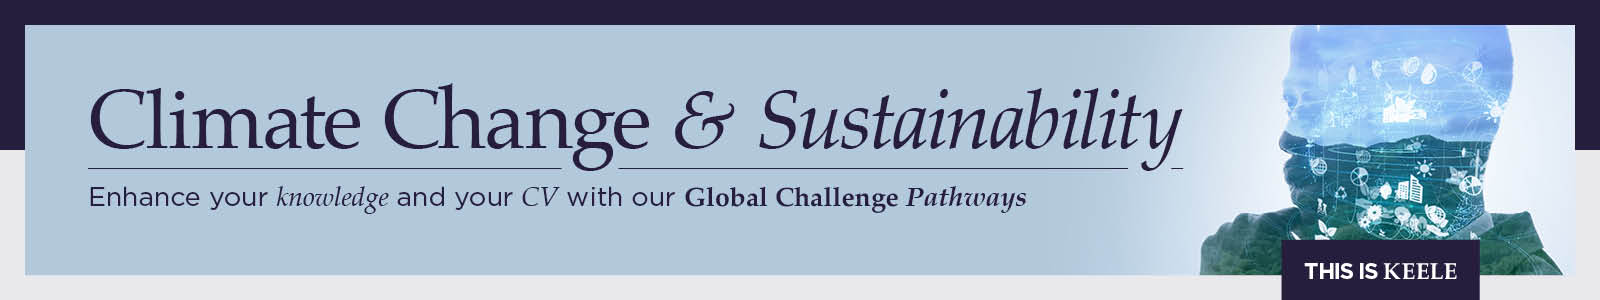 Climate change and sustainability banner